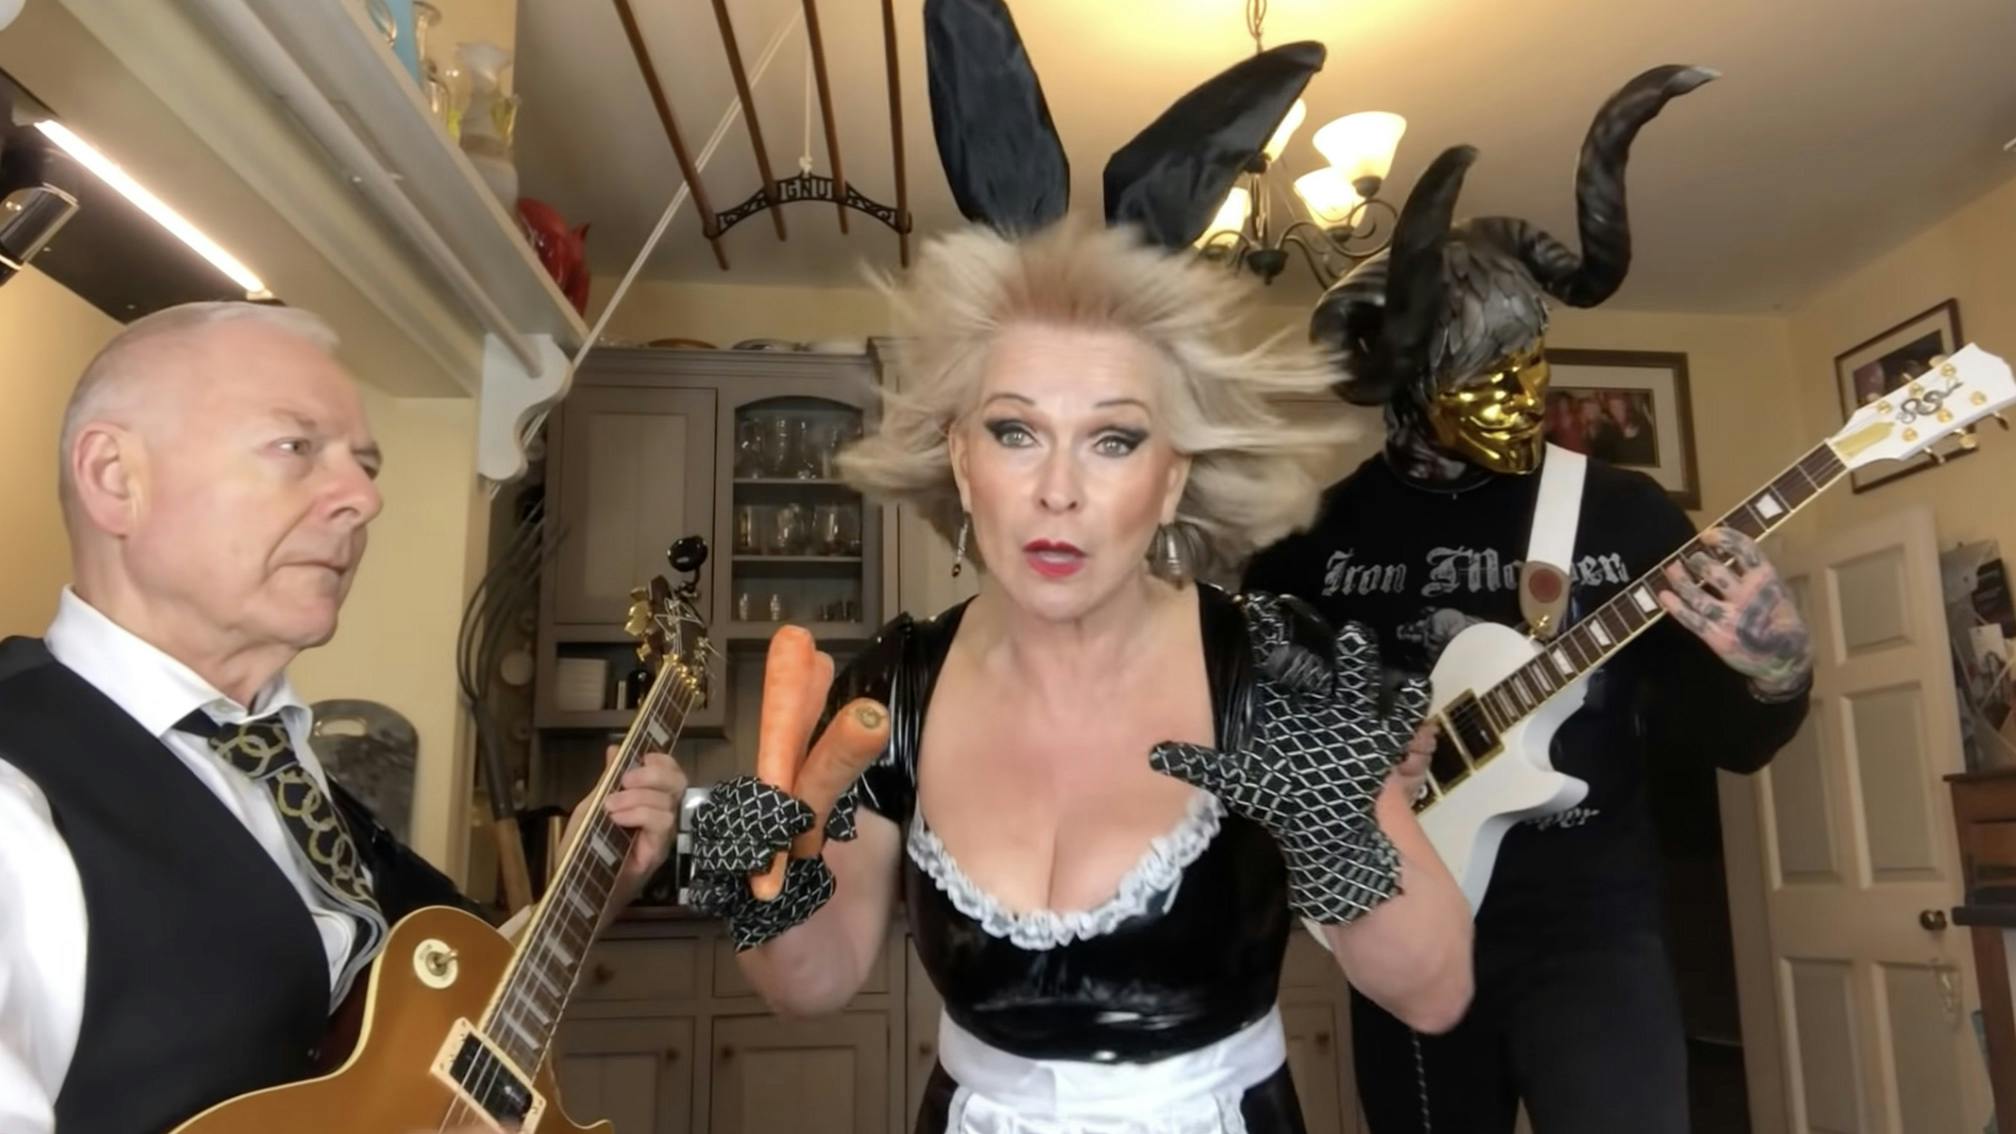 Robert Fripp and Toyah Willcox cover The Number Of The Beast: "An Easter twist on this Maiden classic"